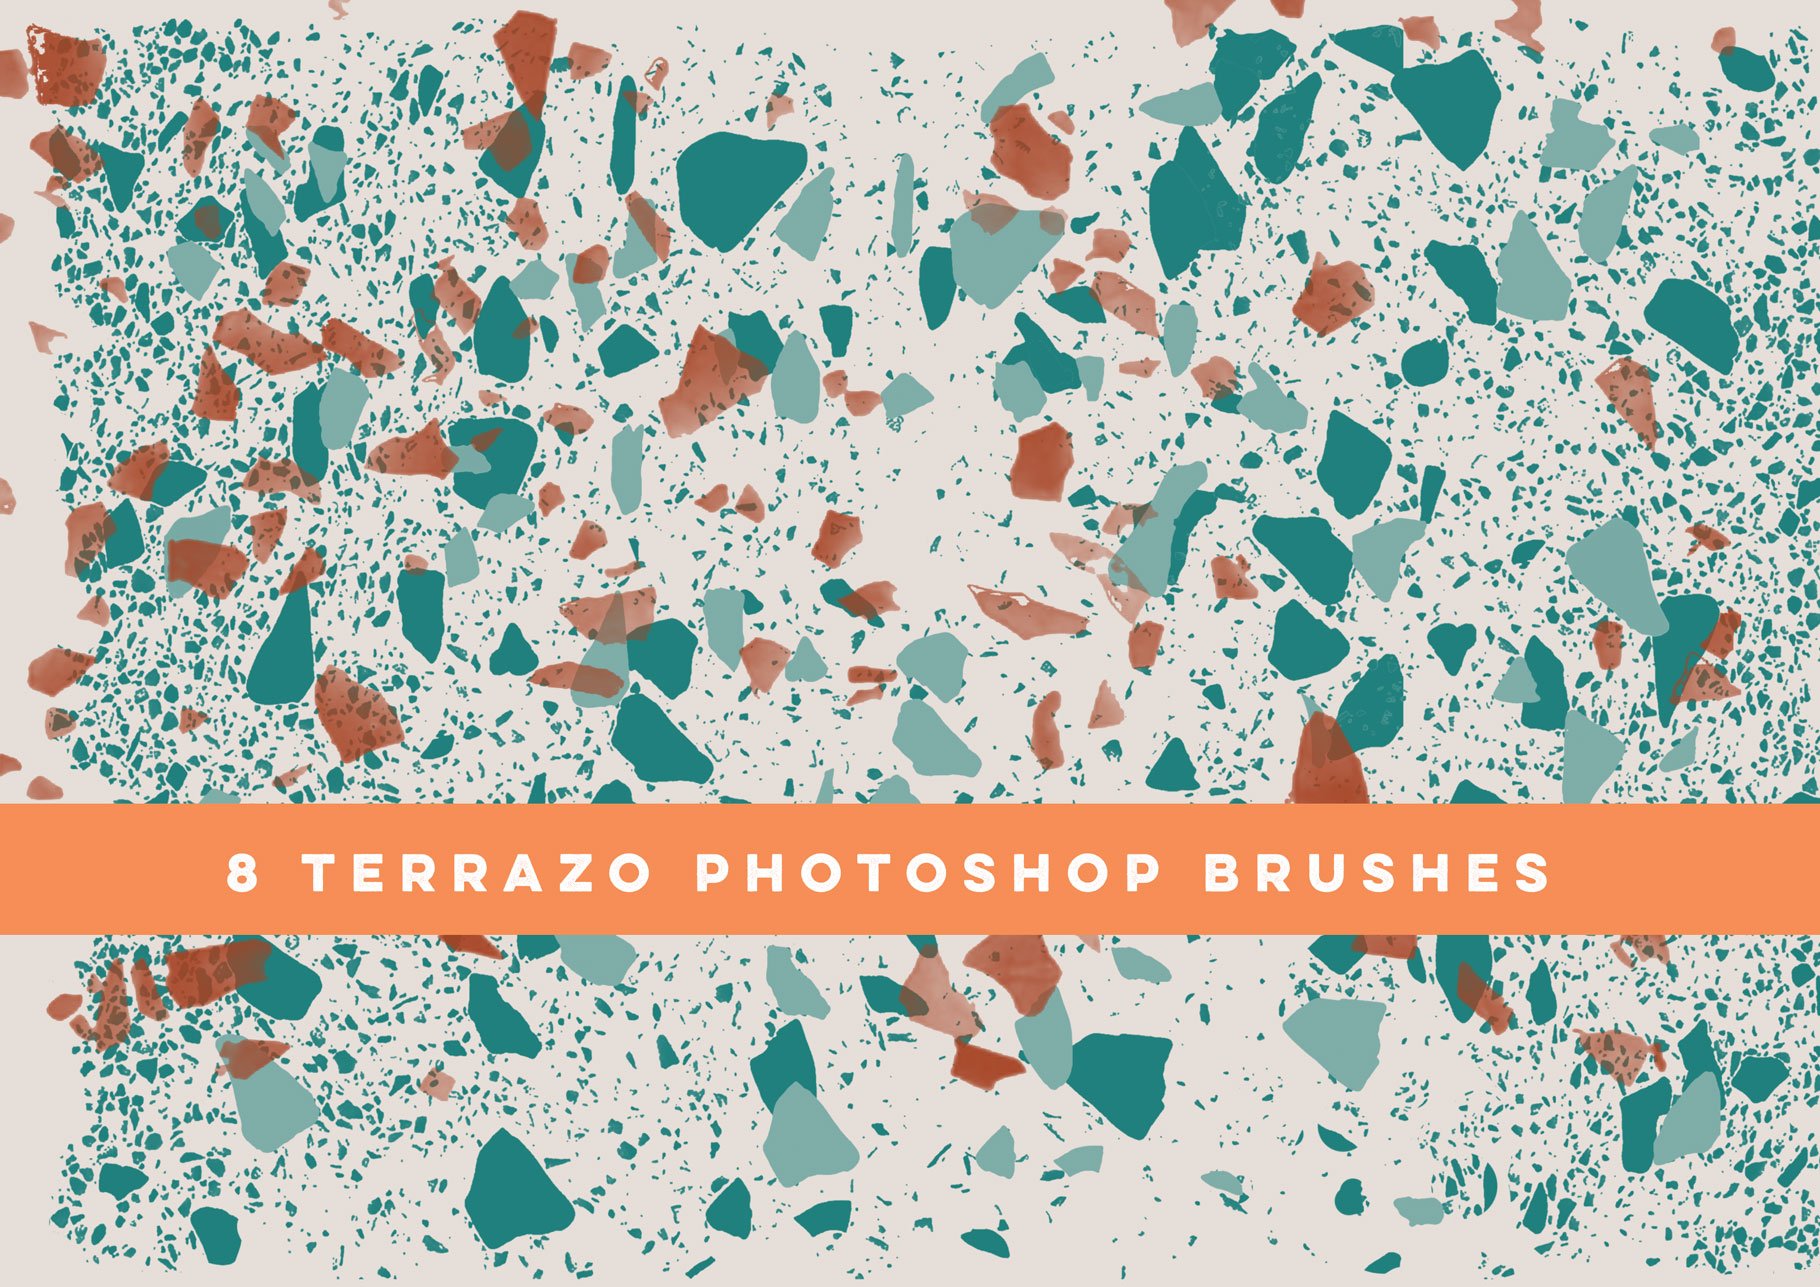 seesee terrazo brushes2 123